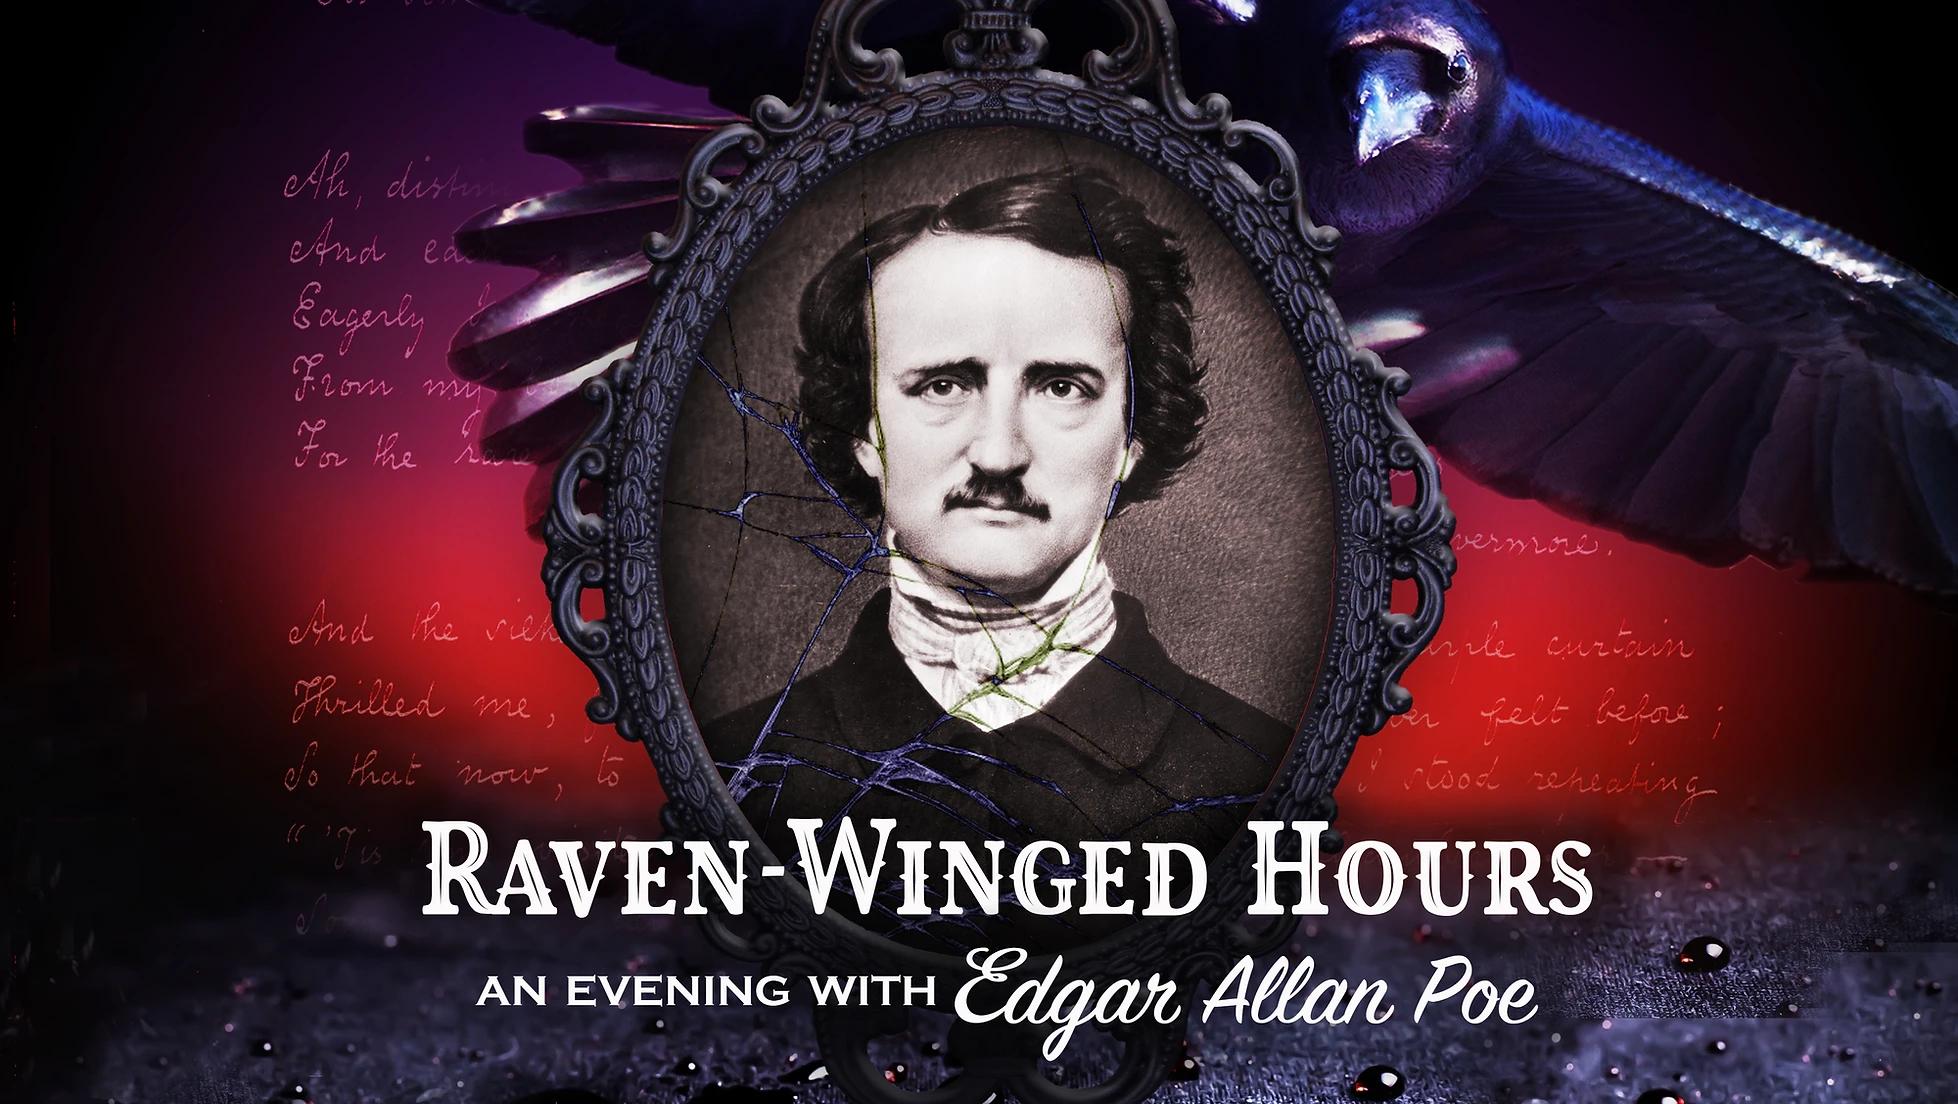 Raven-Winged Hours: An Evening with Edgar Allan Poe